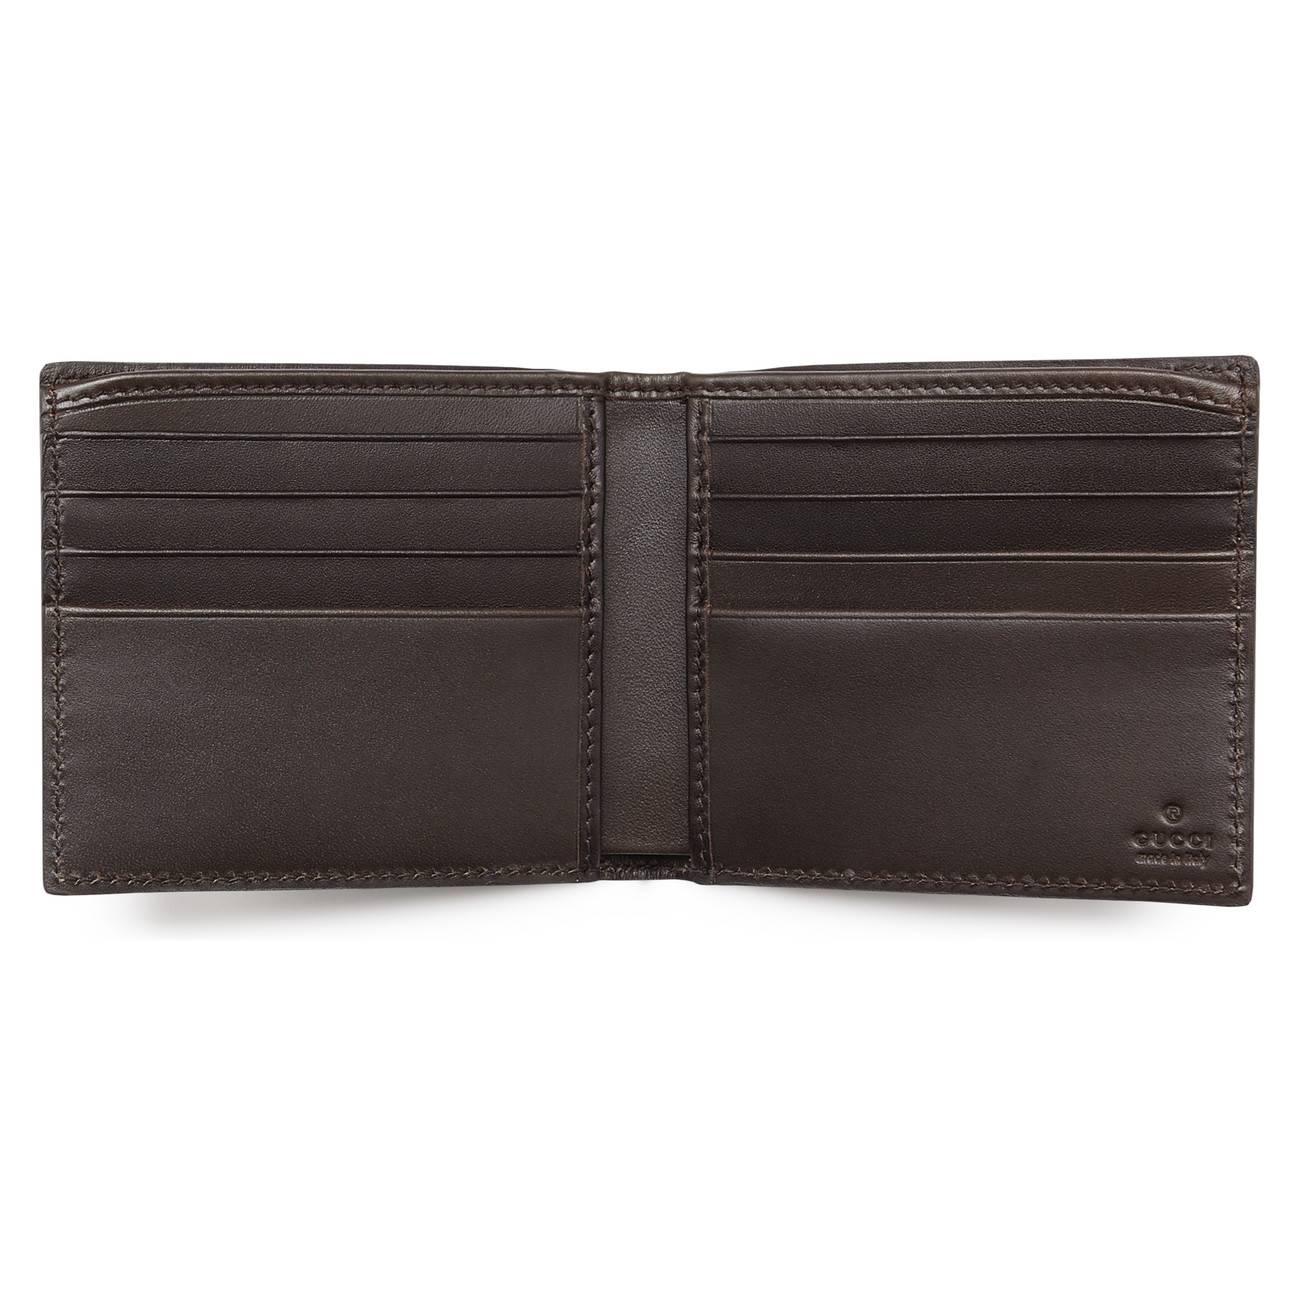 Gucci Canvas Web GG Supreme Wallet in Brown for Men - Lyst